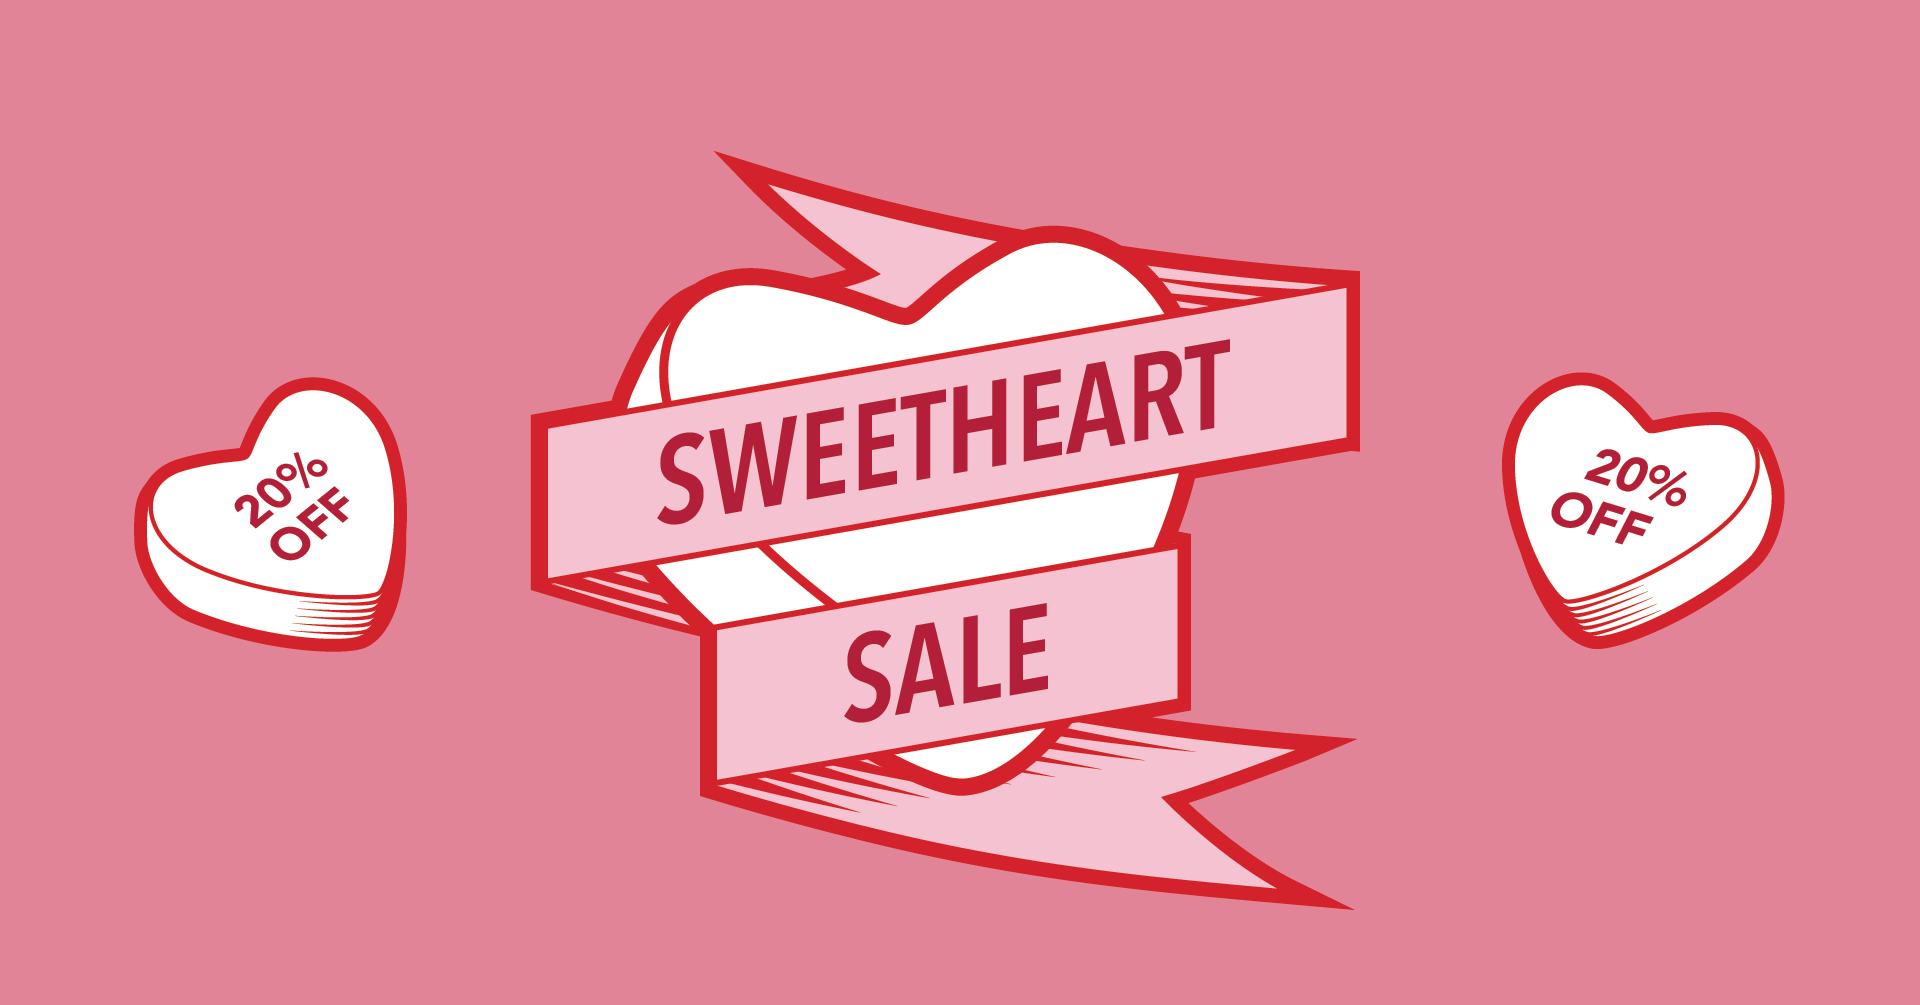 white hearts on pink background with text "sweetheart sale 20% off"